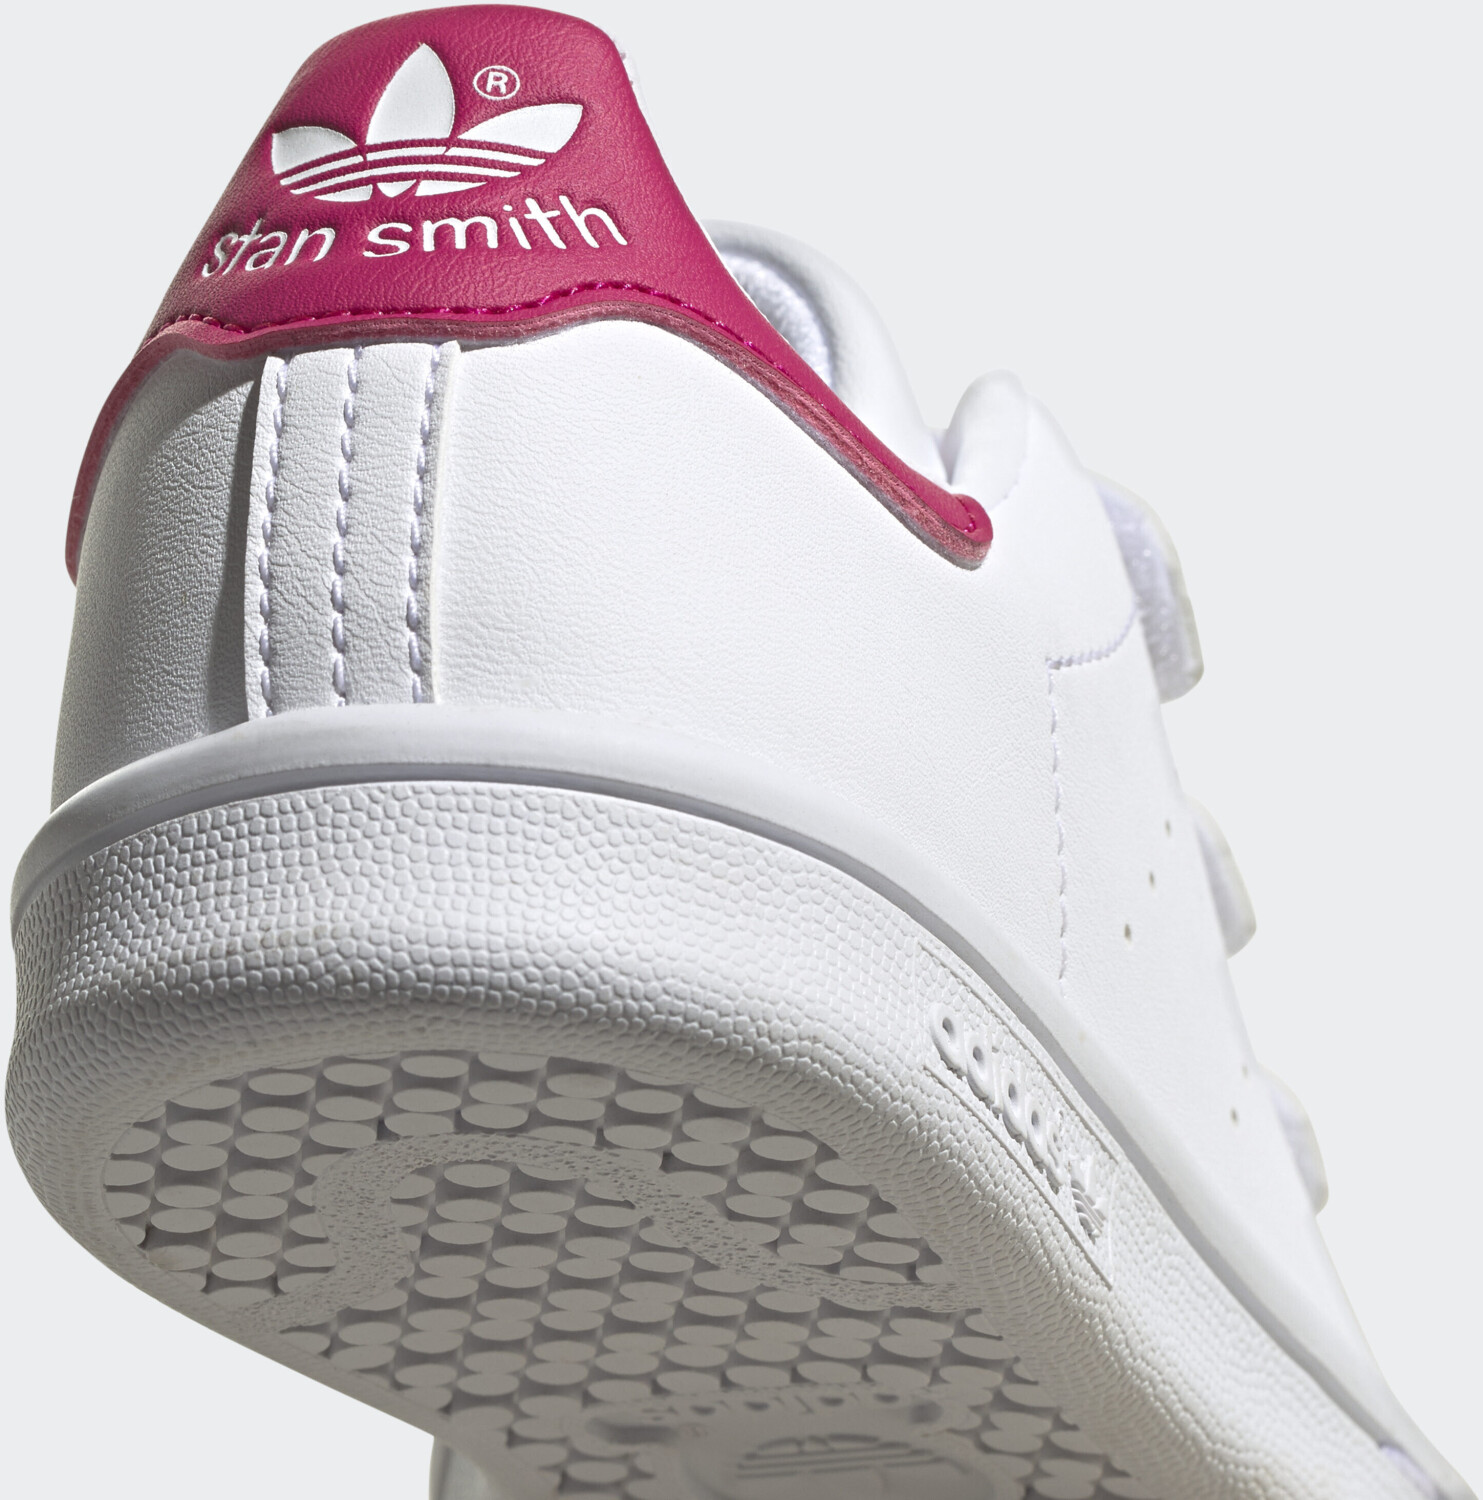 Cloud Deals White/Cloud £32.50 on Adidas (Today) Smith from Pink – White/Bold Kinder Buy Stan Best